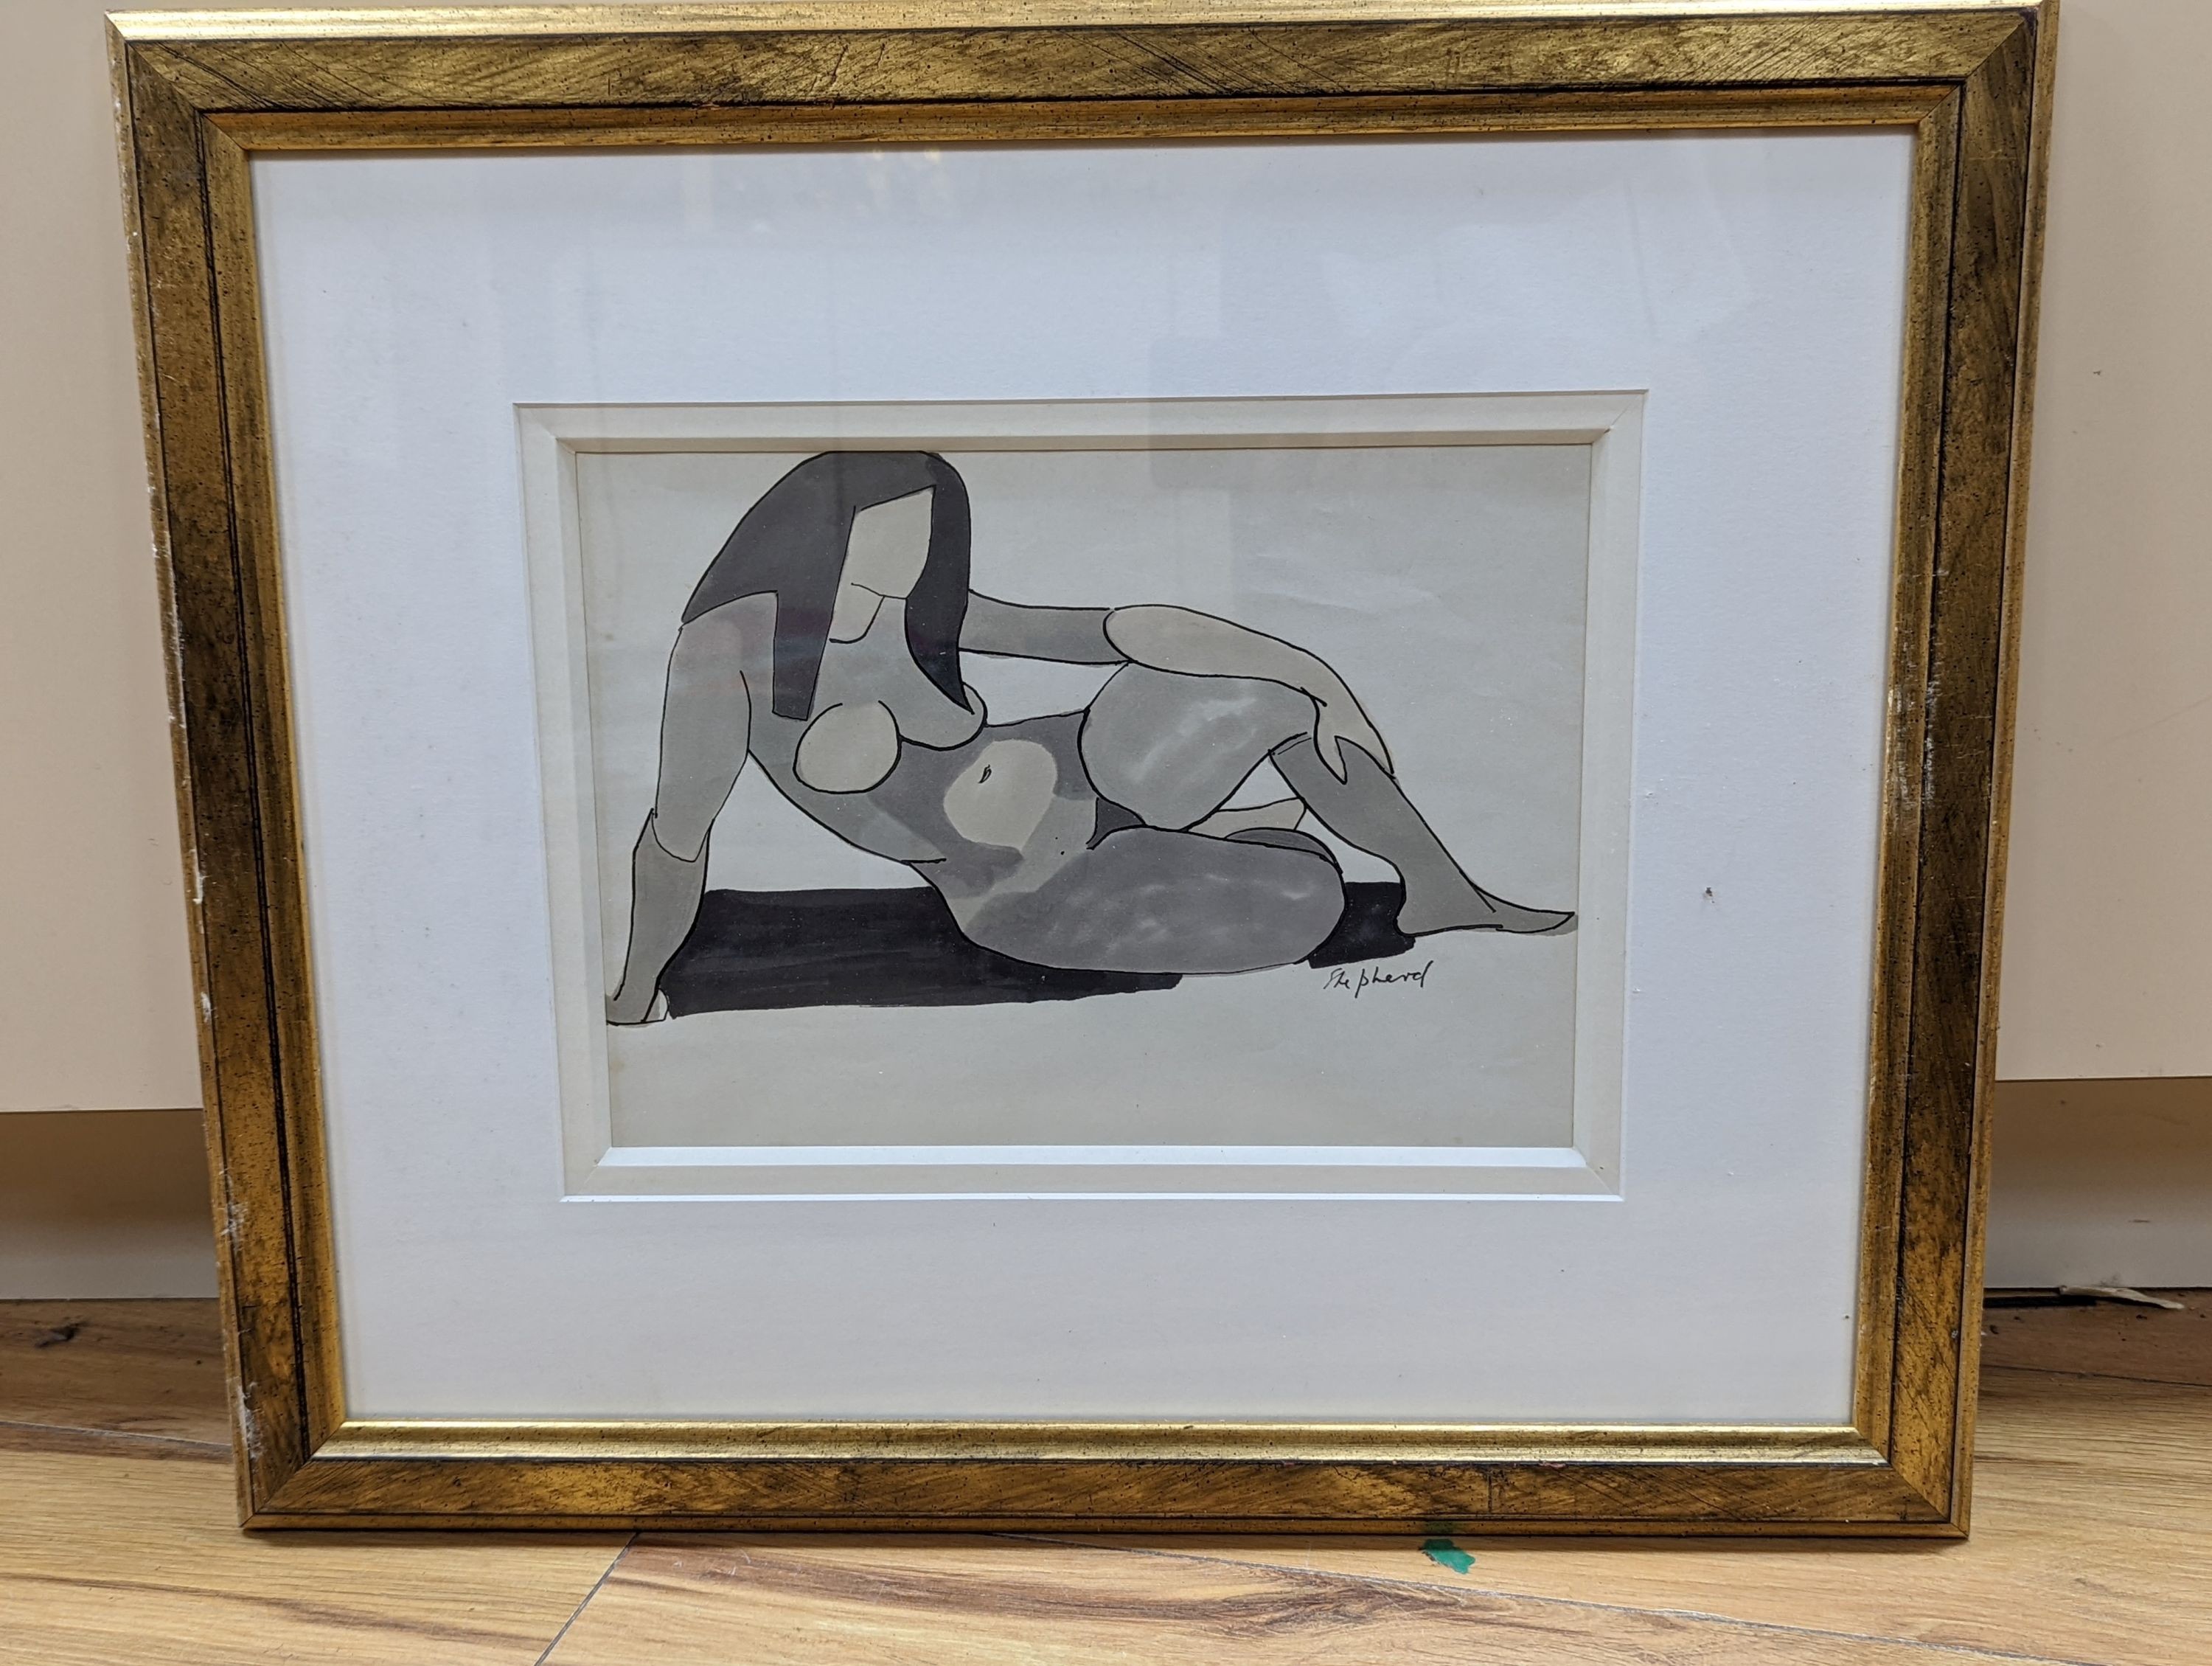 Sidney d'Horne Shepherd (1909-1993), ink and watercolour, Seated nude, signed, 19 x 27cm